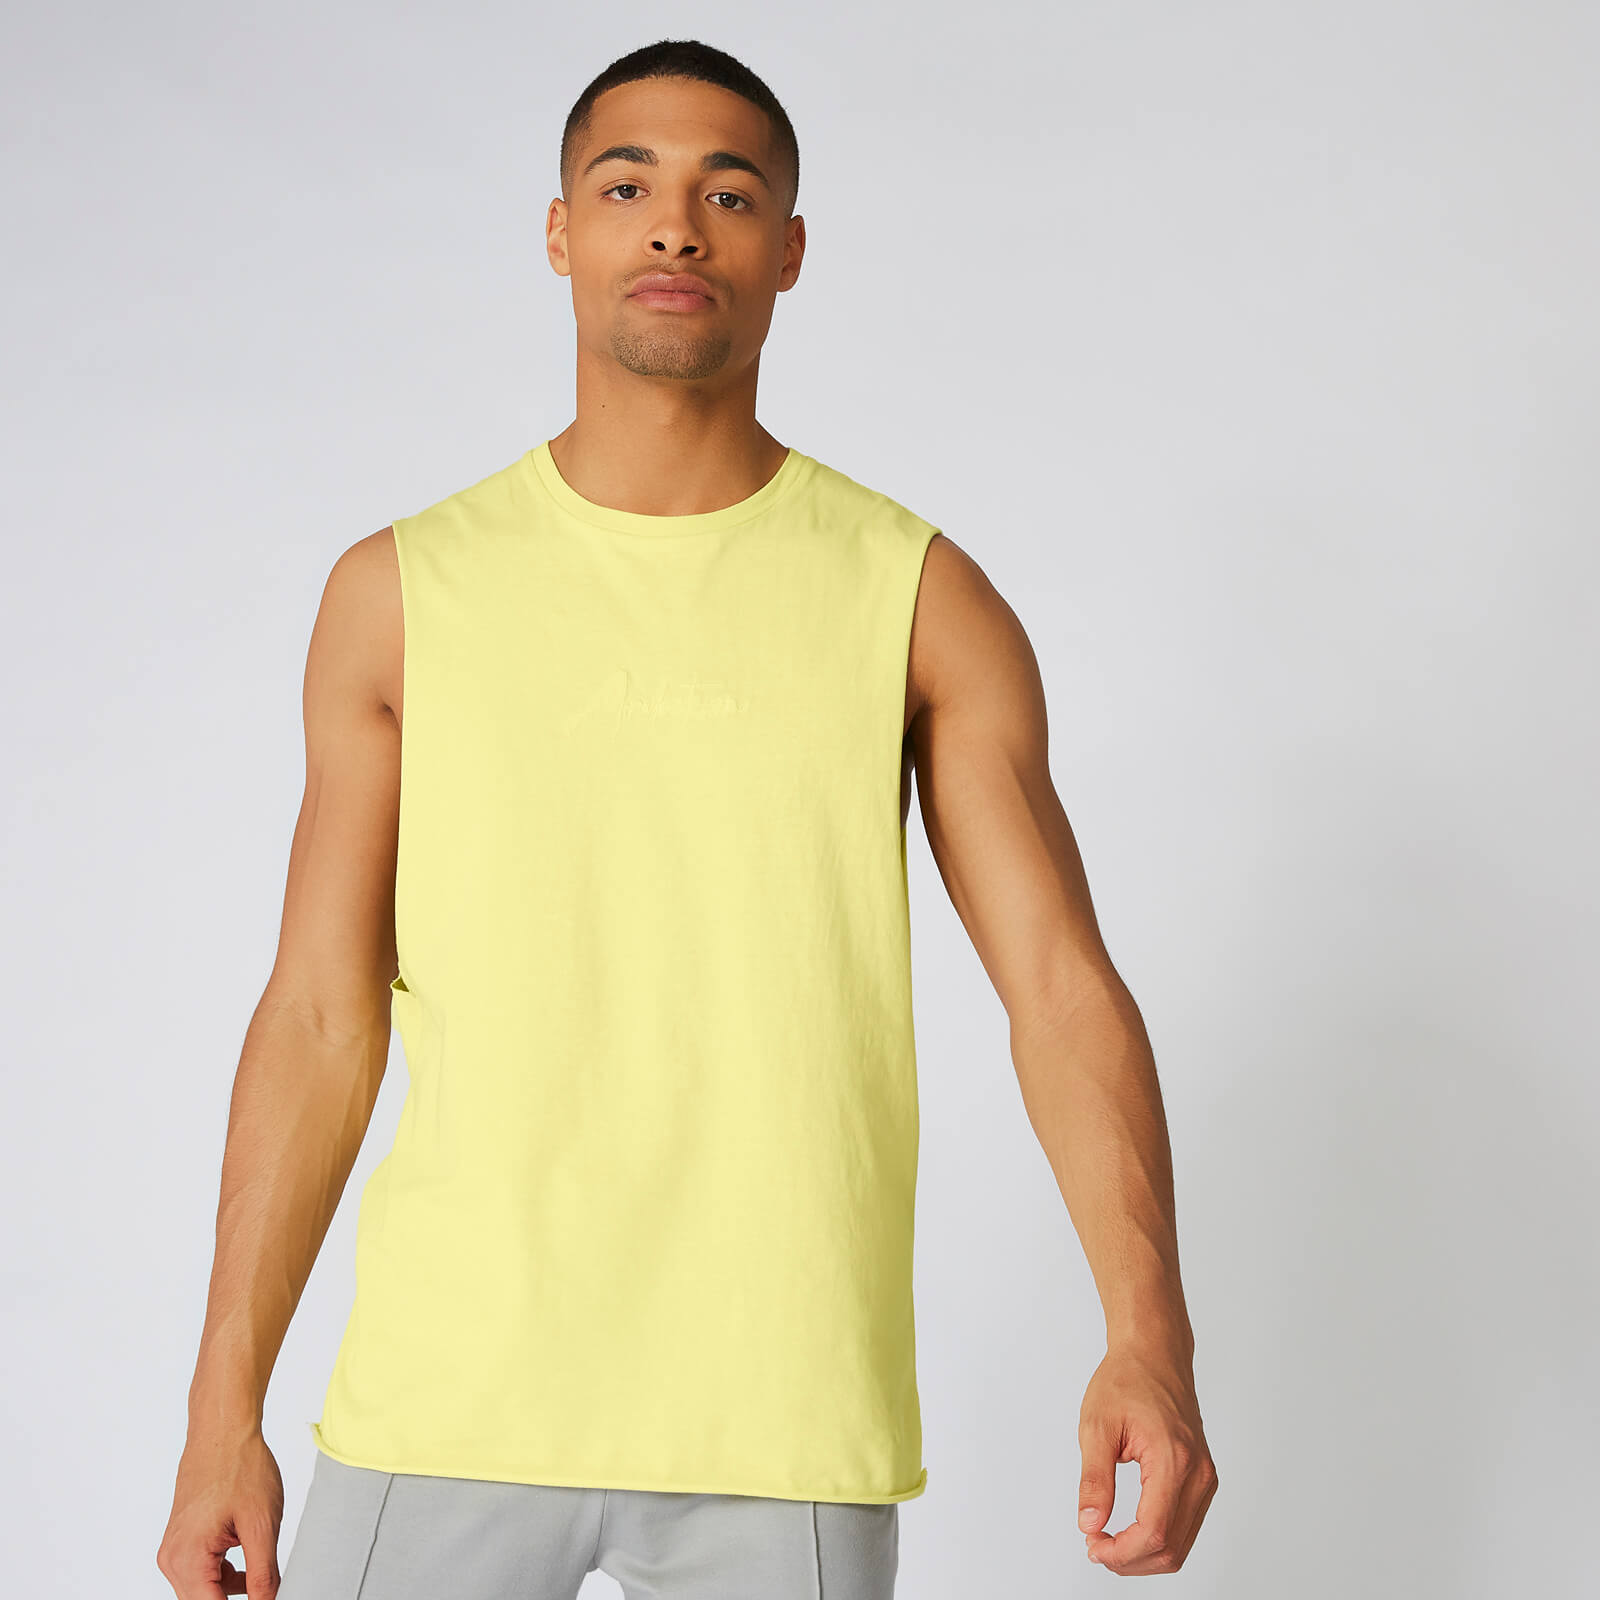 Myprotein Signature Tank Top - Limeade - S